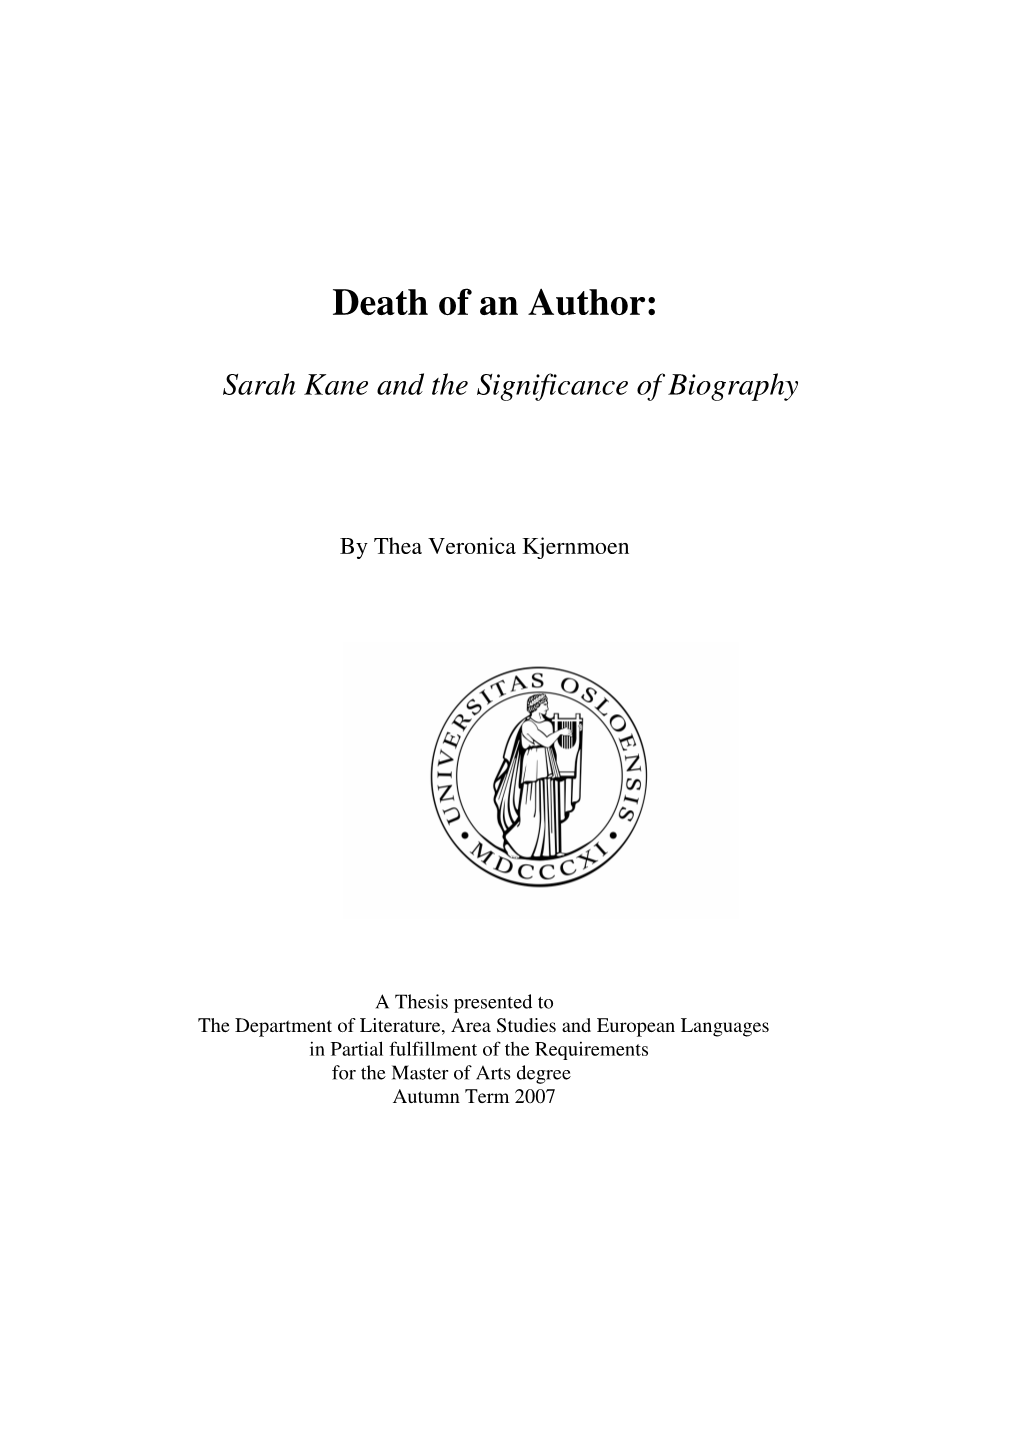 Death of an Author: Sarah Kane and the Significance of Biography